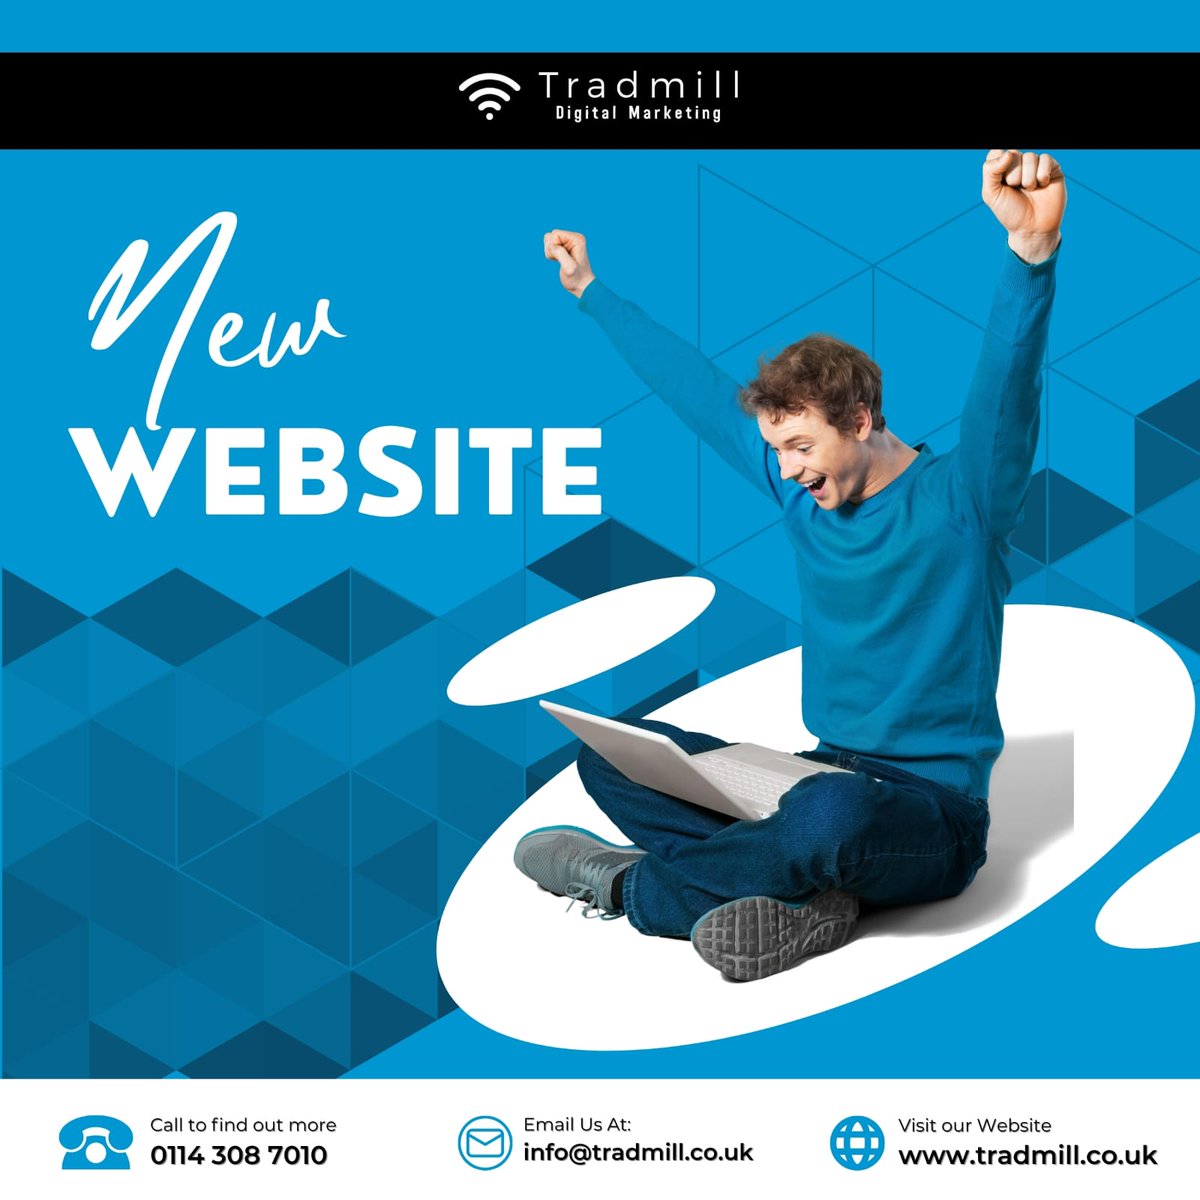 #Tradmill #Newwebsites #Sheffield #PayPerClick #FacebookAds #GoogleAds #InstrgramAds #PPC #digitalmarketing #marketing #socialmediamarketing #socialmedia #digitalmarketingagency #Franchisewithus #franchising #onlinebusiness #SouthYorkshire bit.ly/3OSvPba